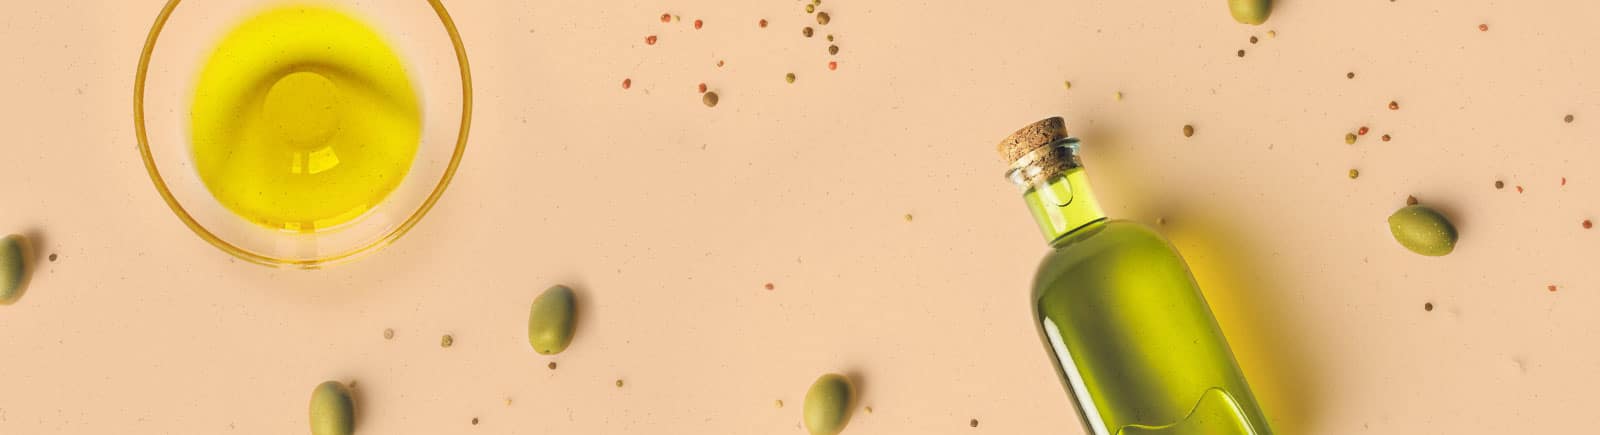 header image of a bottle and bowl of olive oil, with olives scattered throughout